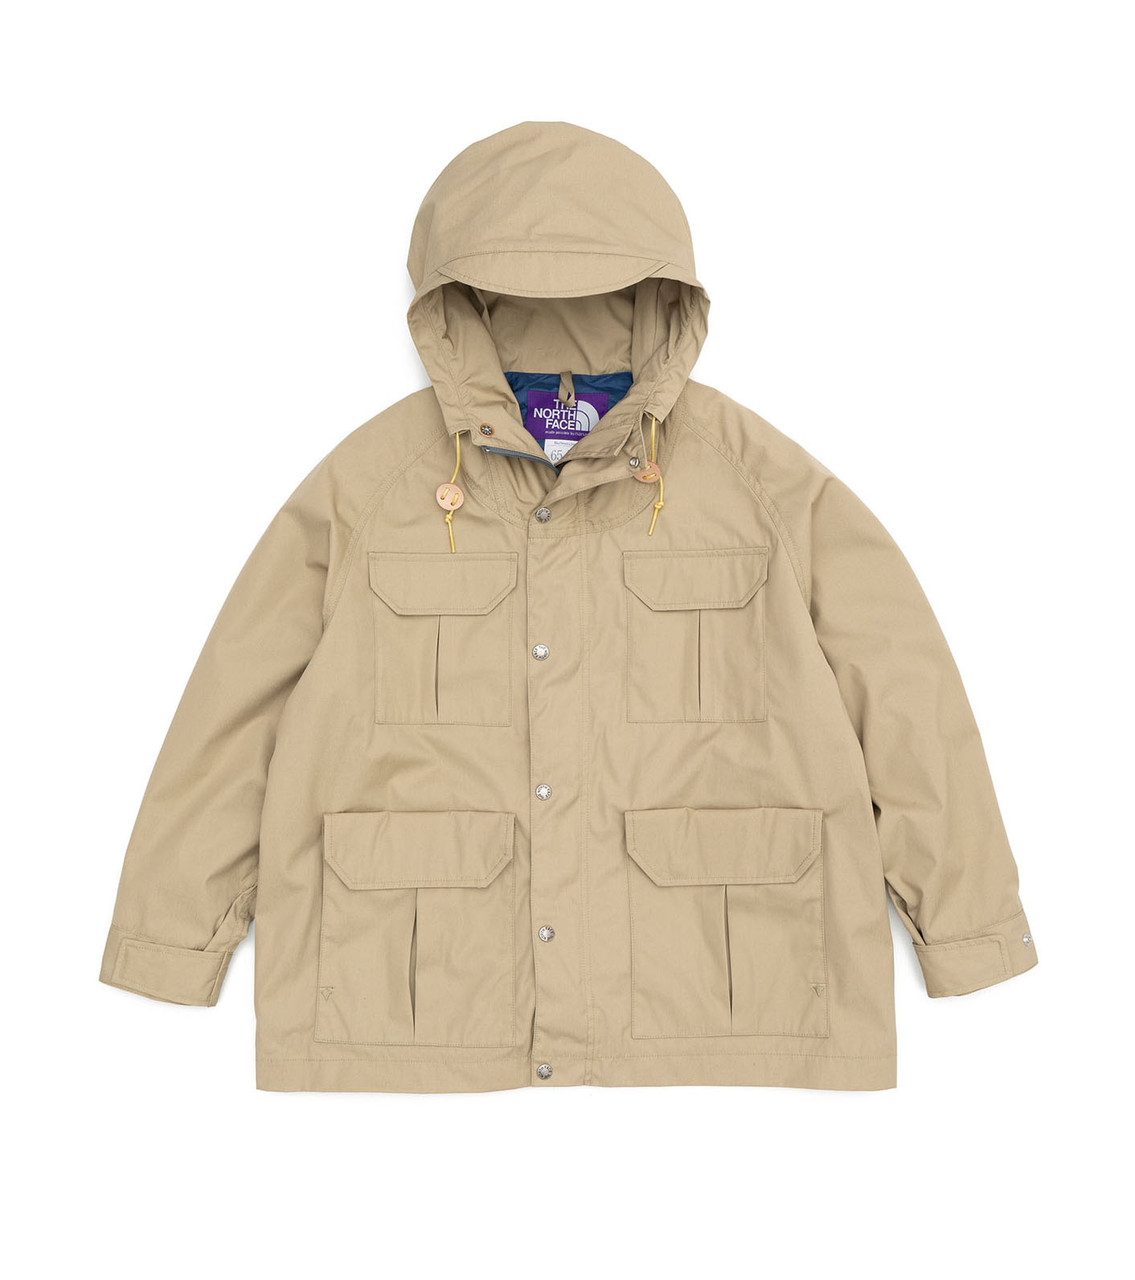 THE NORTH FACE PURPLE LABEL 65/35 Big Mountain Parka NP2302N 6595